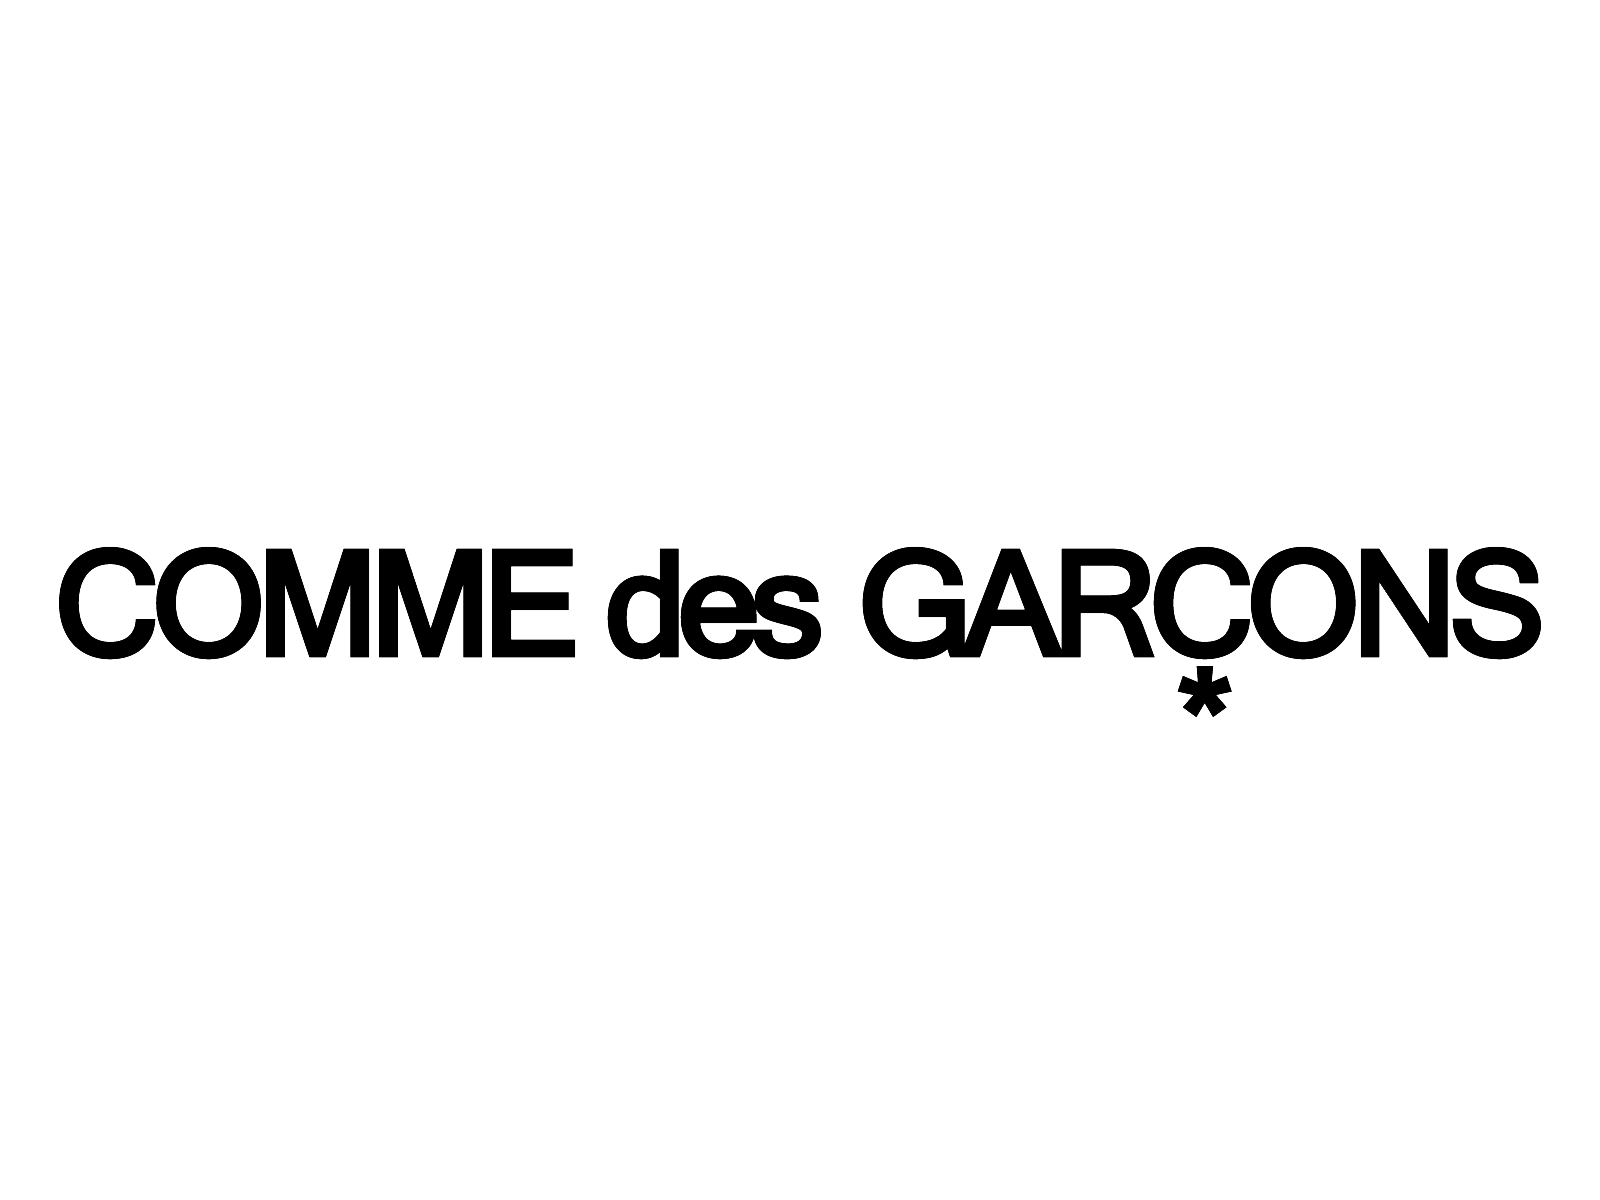 Comme Des Garcons Iphone 6 Wallpaper Top Sellers  playgrownedcom  1686272464